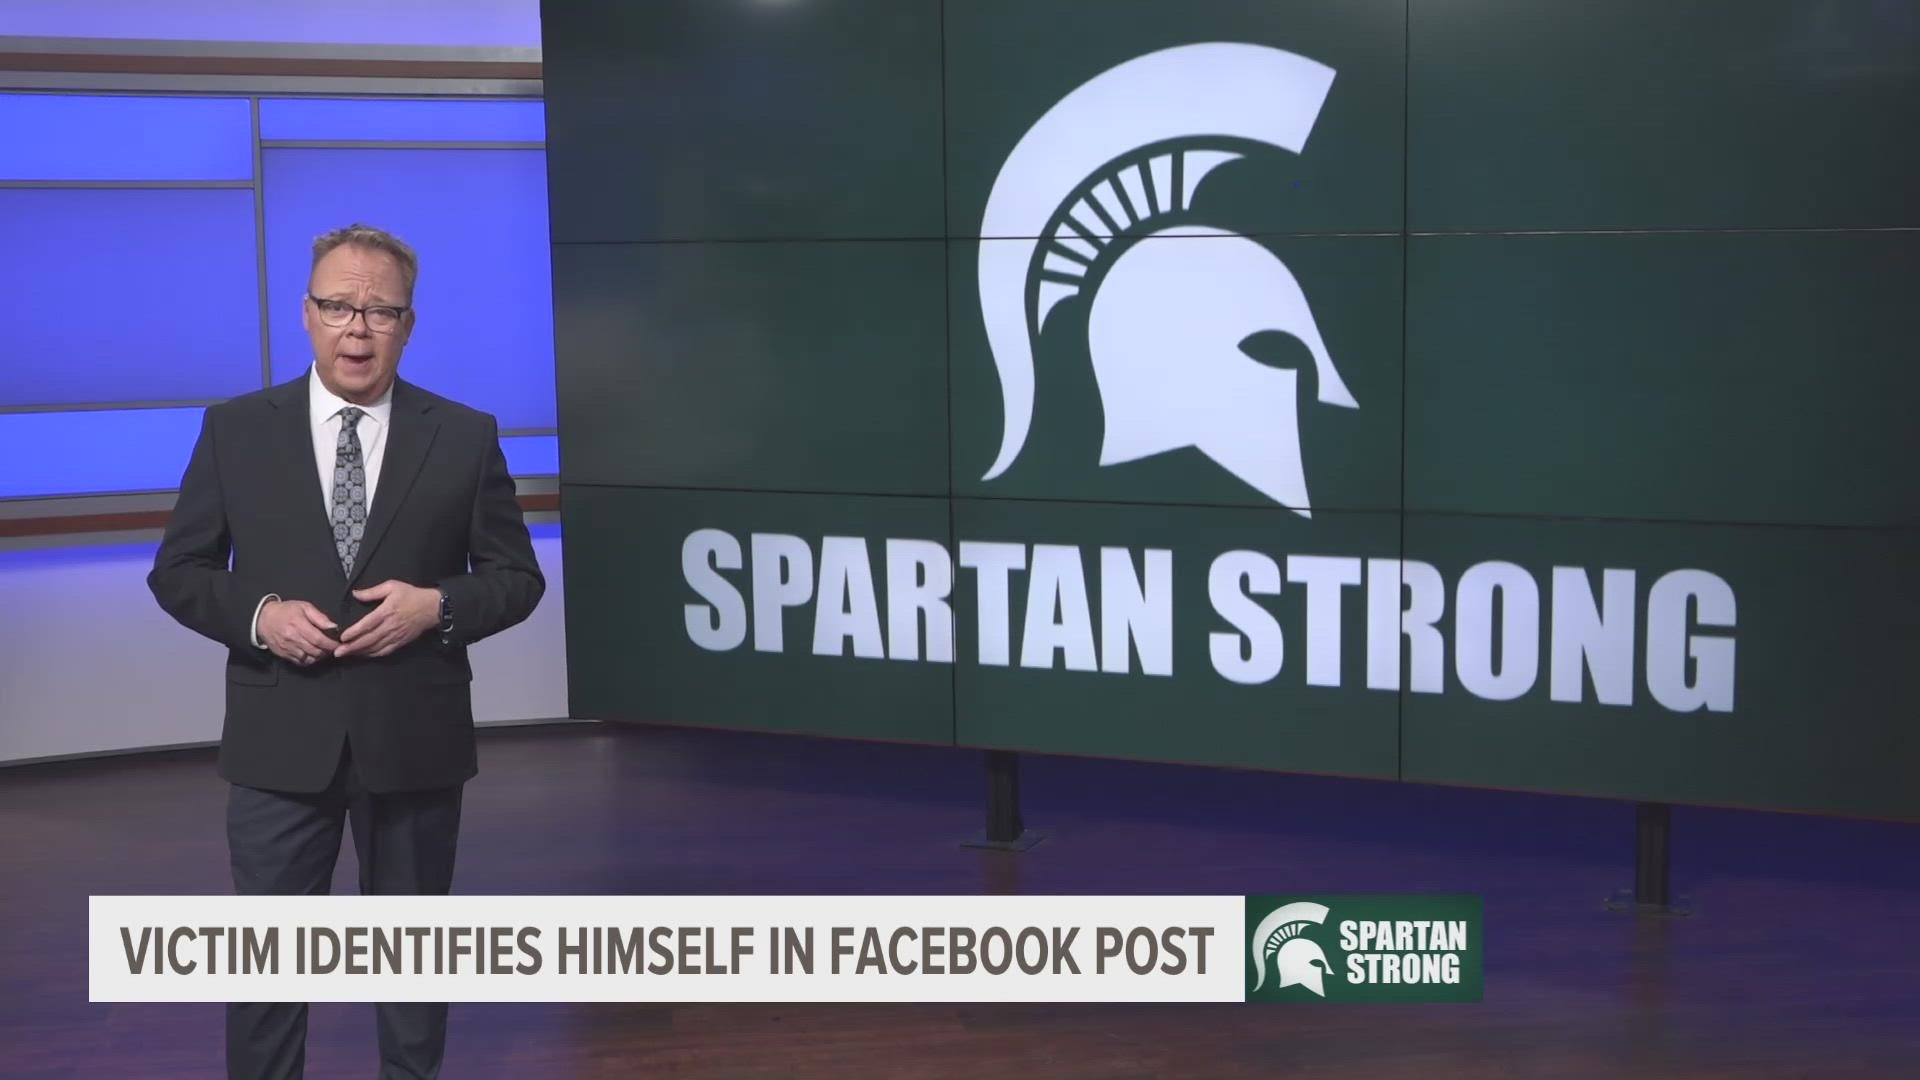 "My world has been turned upside down so suddenly but I refuse to be a number, a statistic," MSU student Troy Forbush wrote on Facebook Sunday.